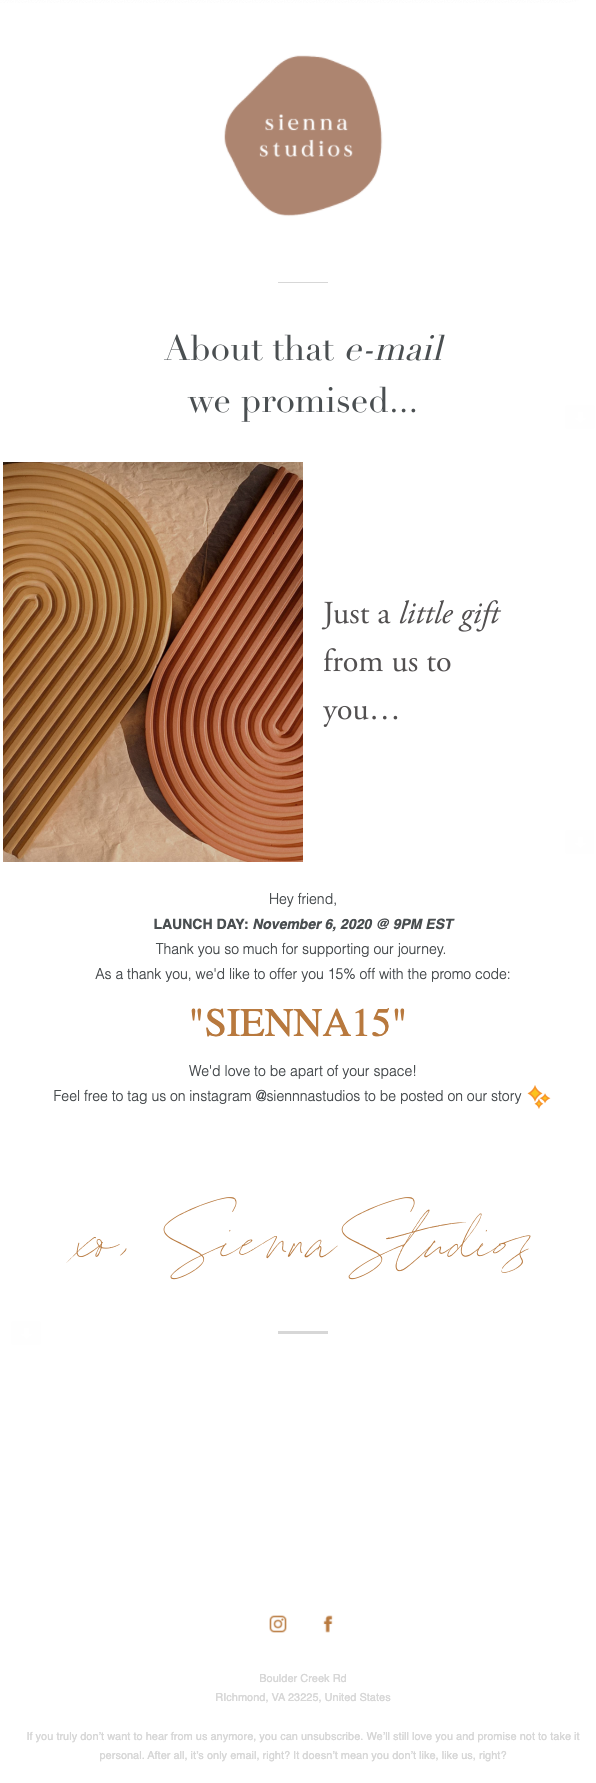 Optimize_Your_Welcome_Series_Emails_-_Sienna.png